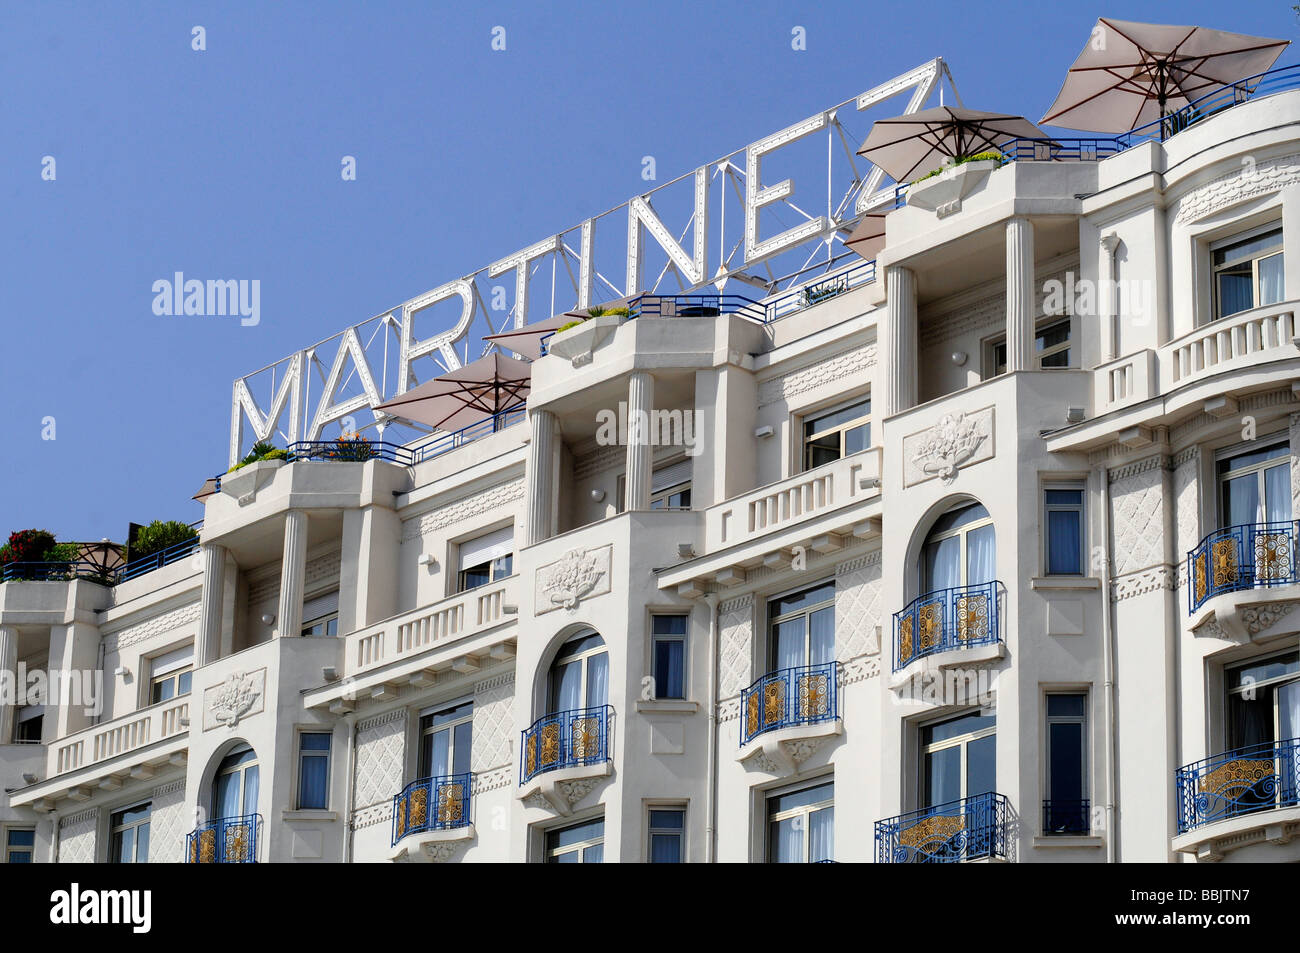 the Palace Hotel 'Martinez', one of the hotels appreciated by celebrities during the Cannes film festival, in Cannes, France. Stock Photo